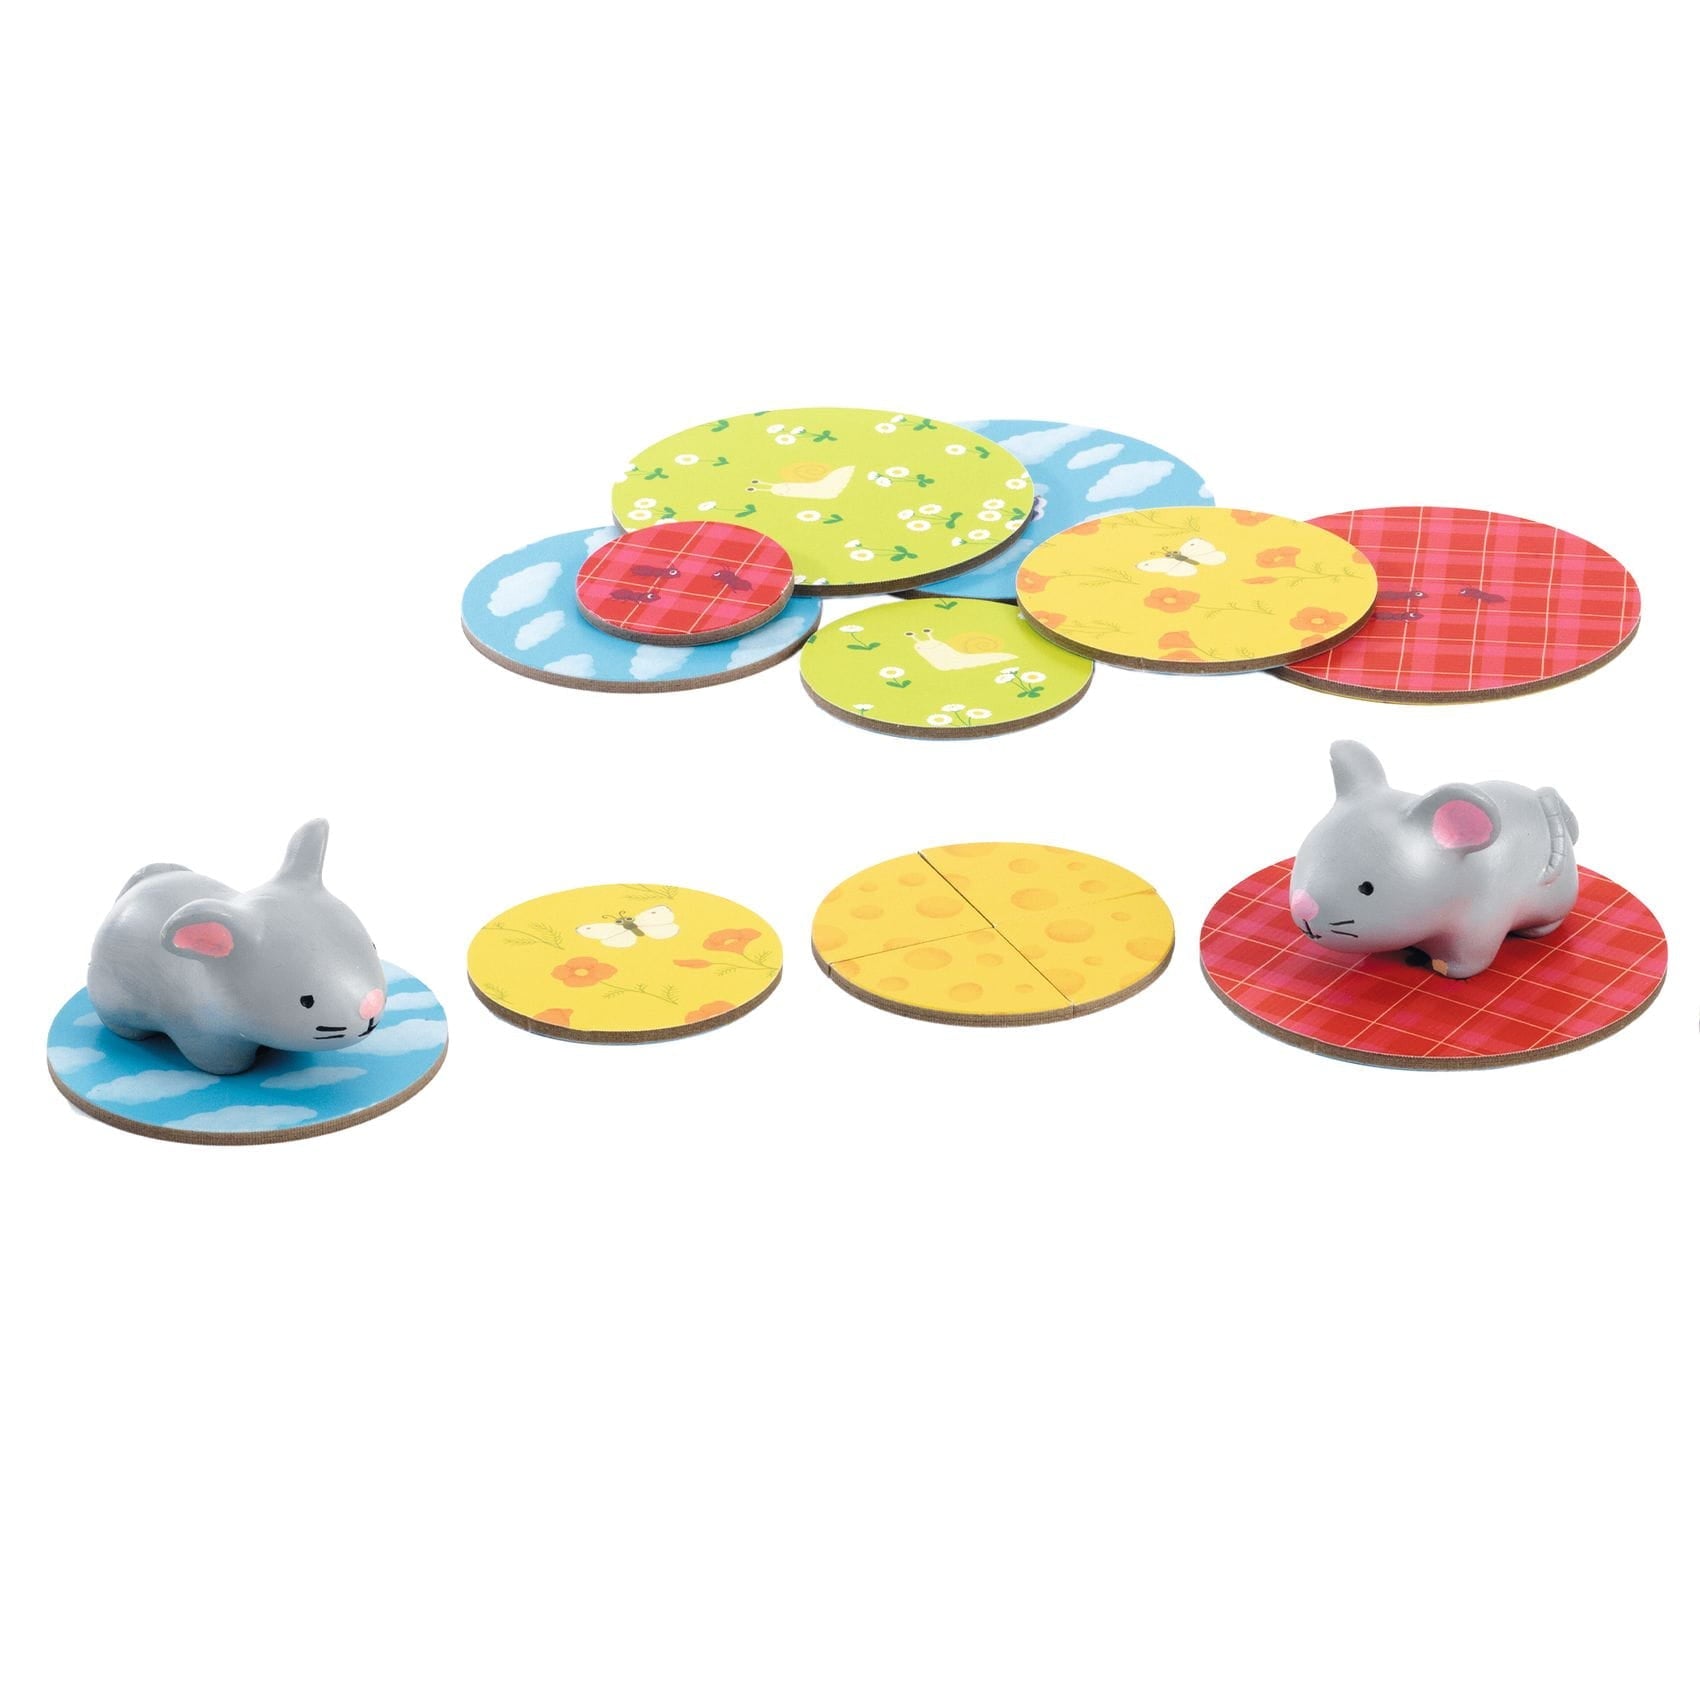 Djeco: Little Lucky Mouse and Cheese Board Board Board